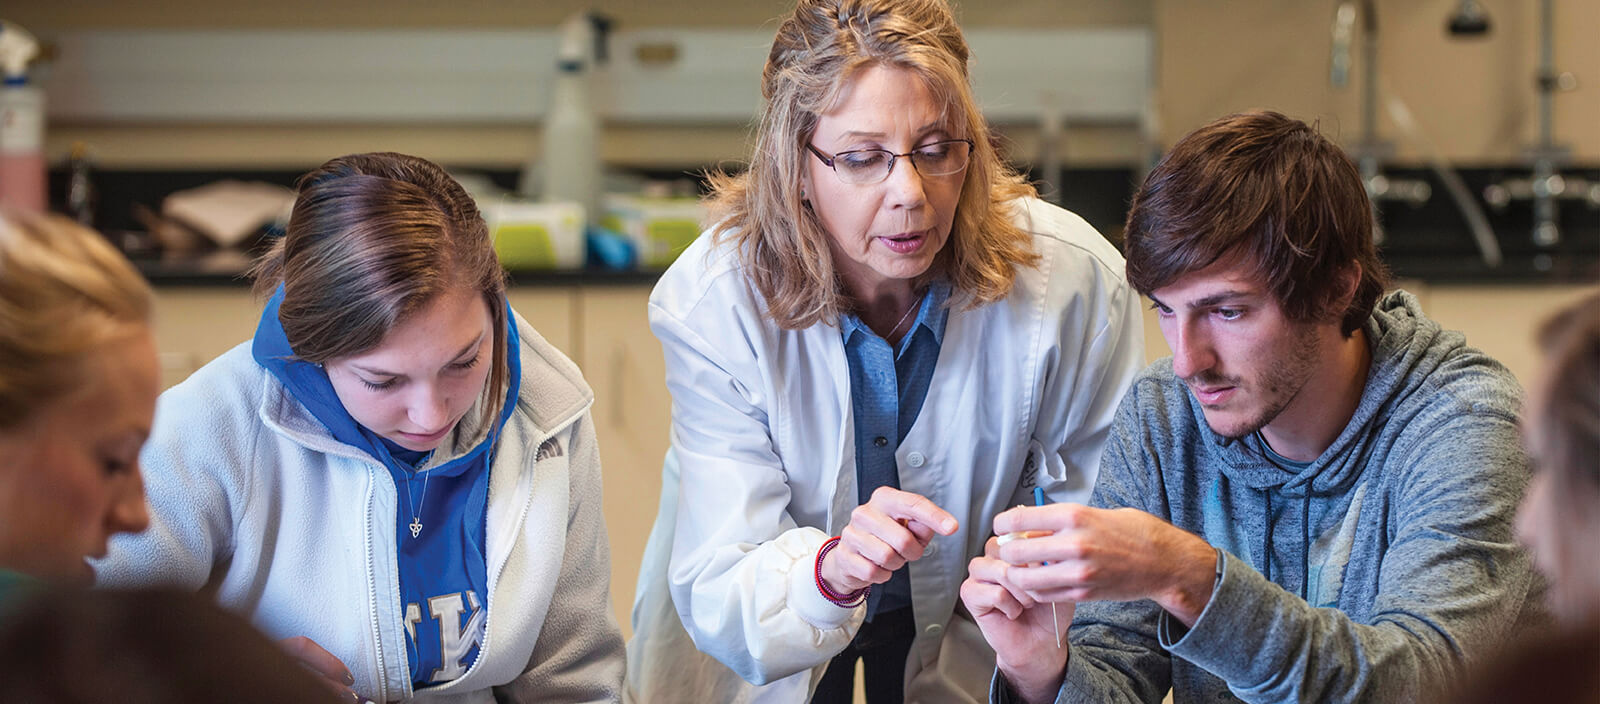 A science faculty member helps two students during a lab.